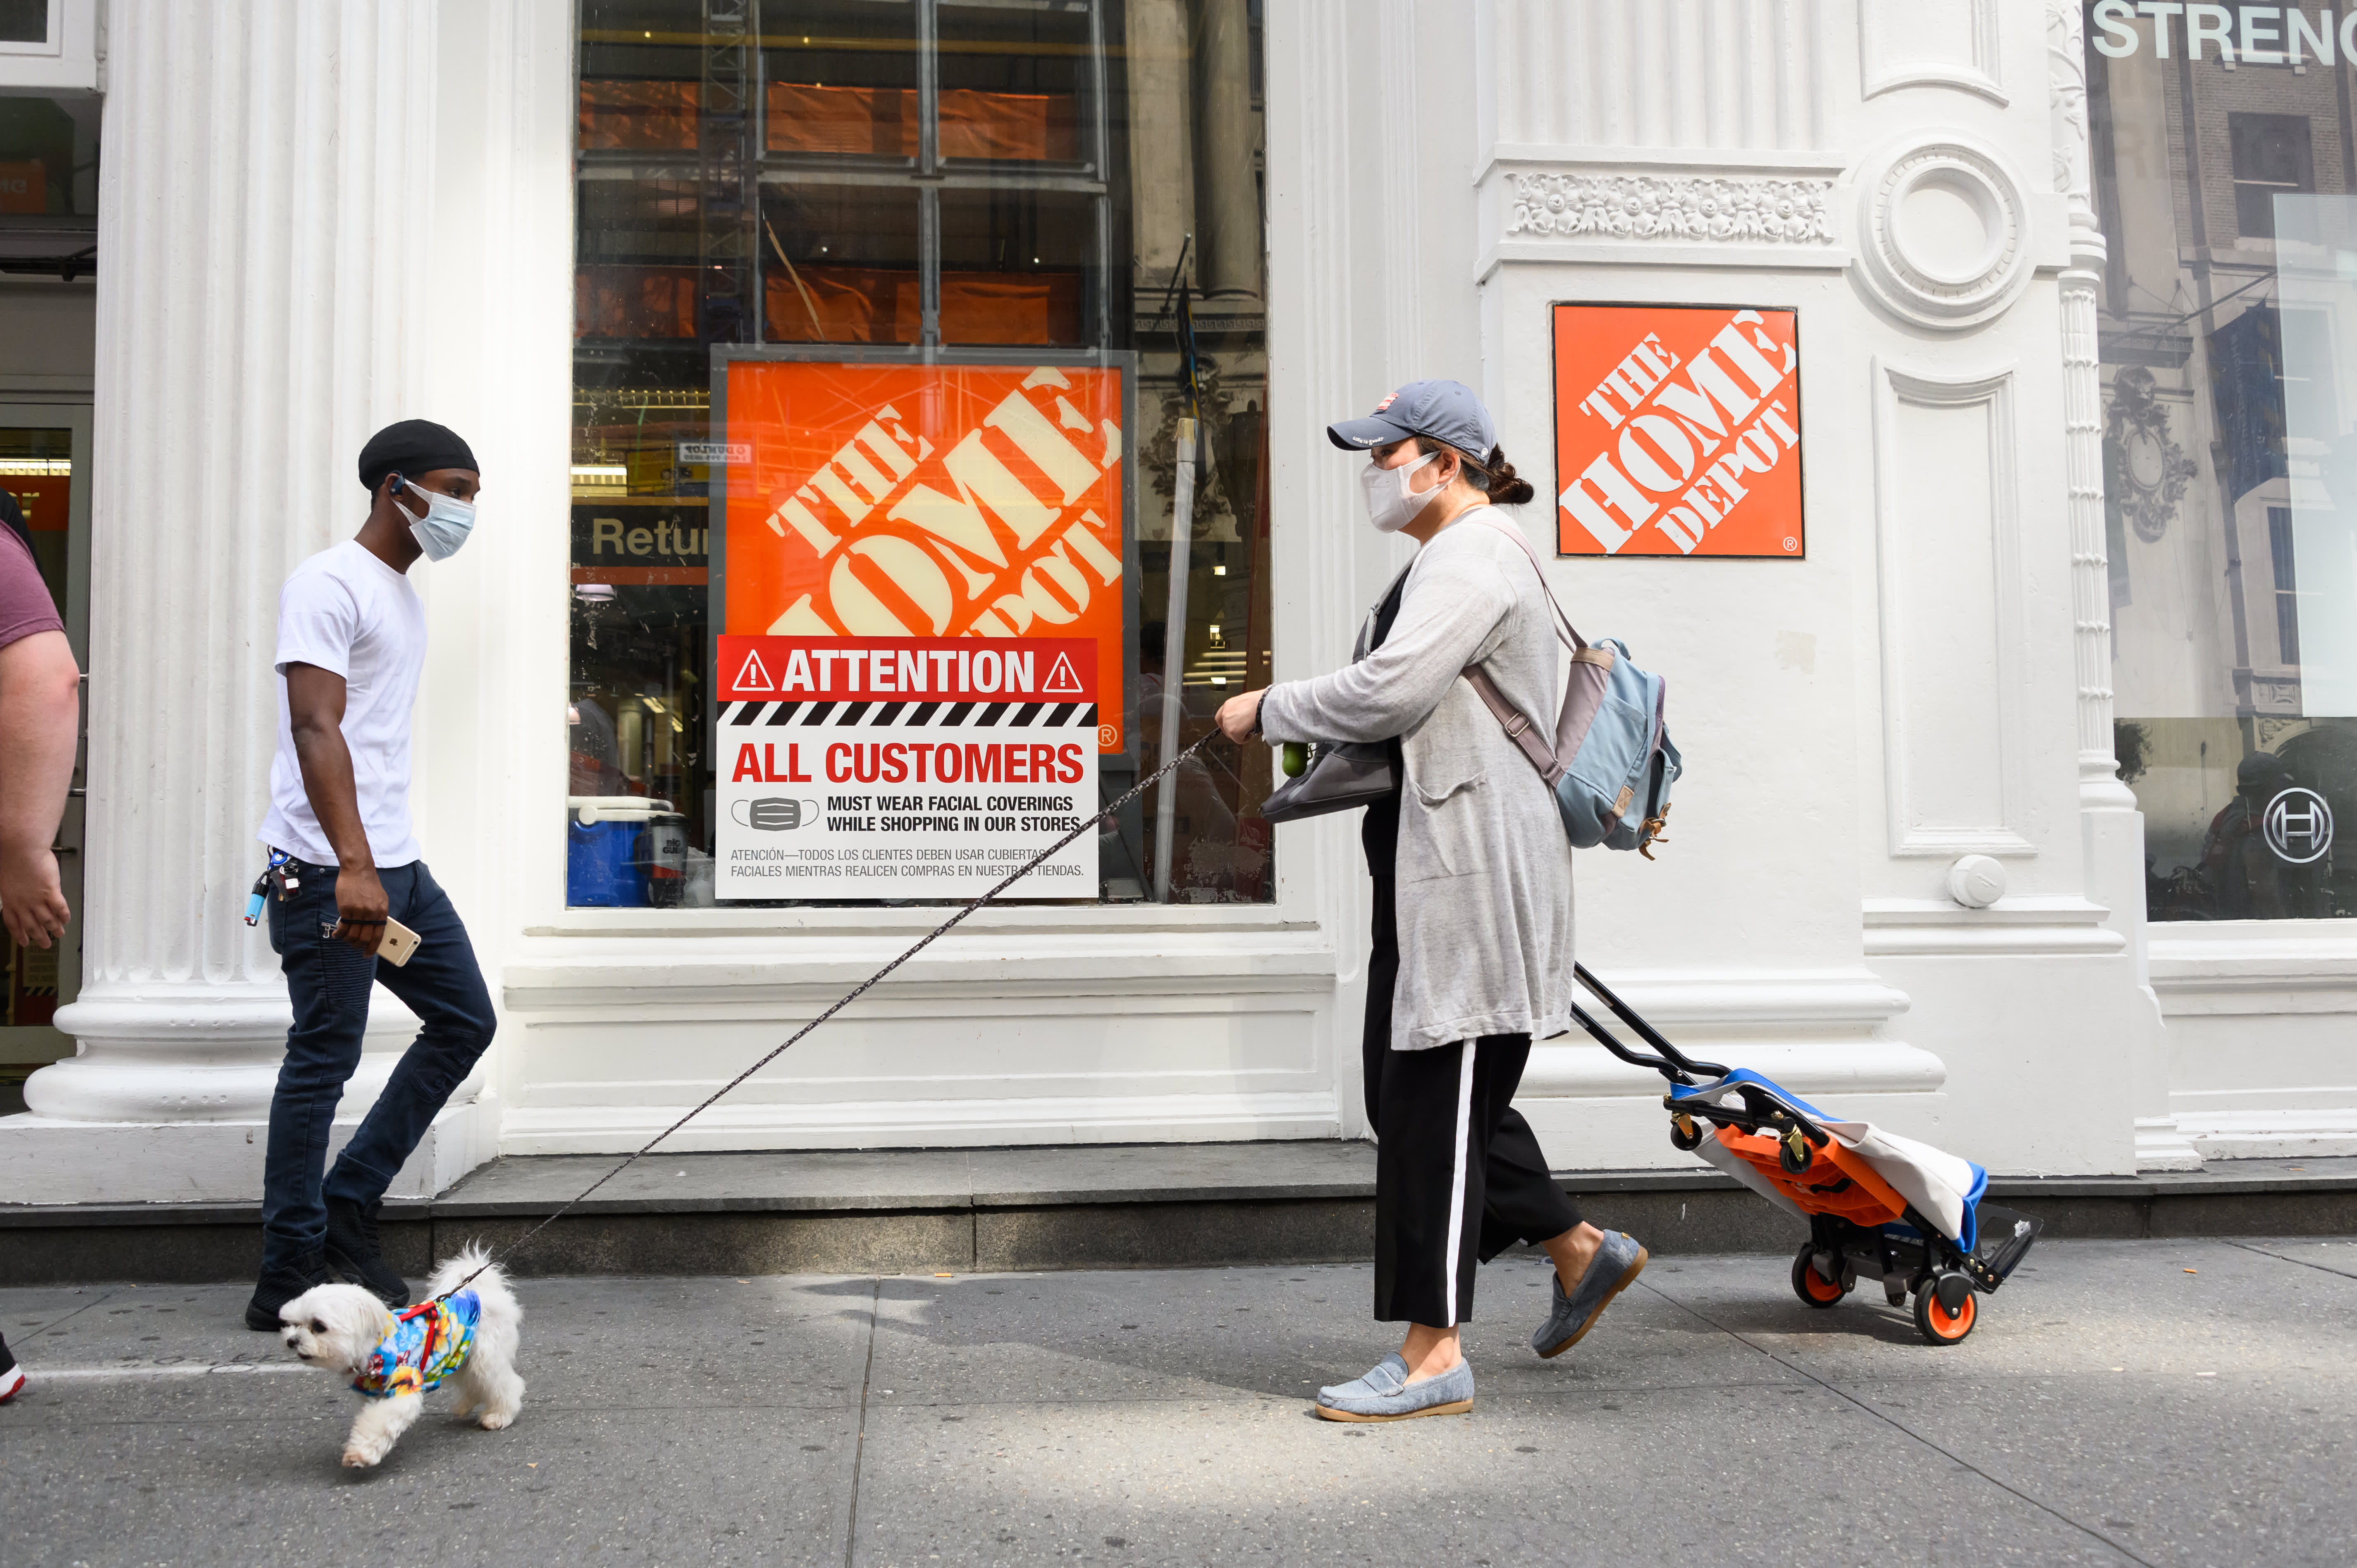 Home Depot (HD) earnings in the fourth quarter of 2020